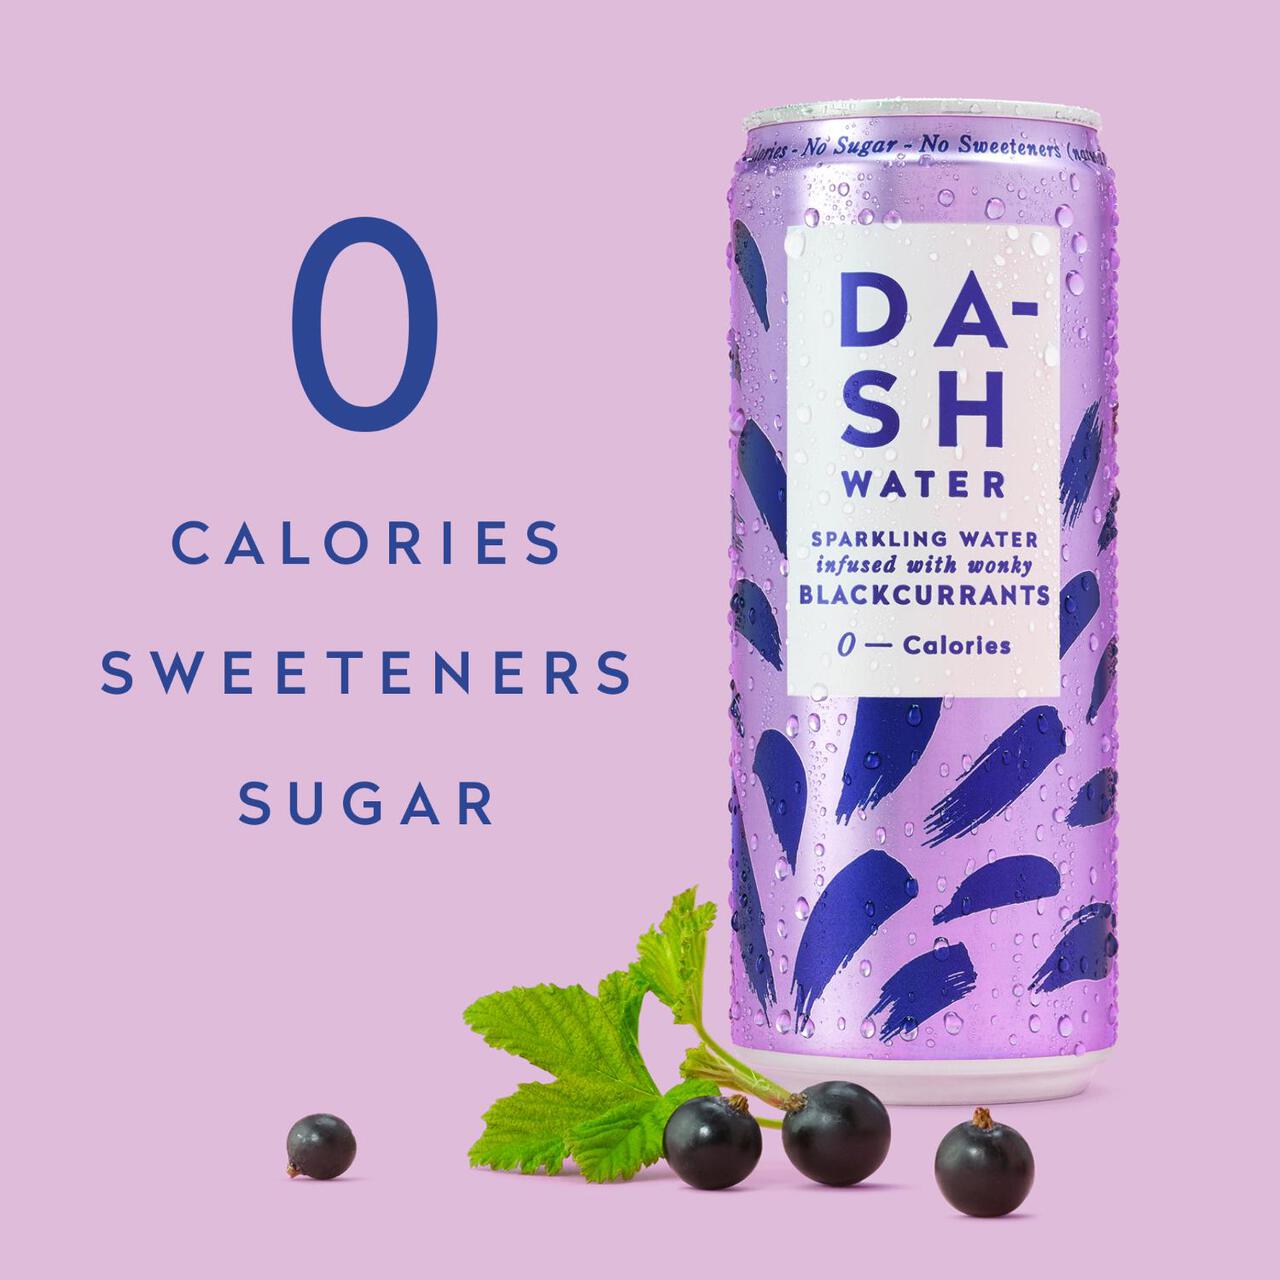 DASH Blackcurrant Infused Sparkling Water 4 x 330ml